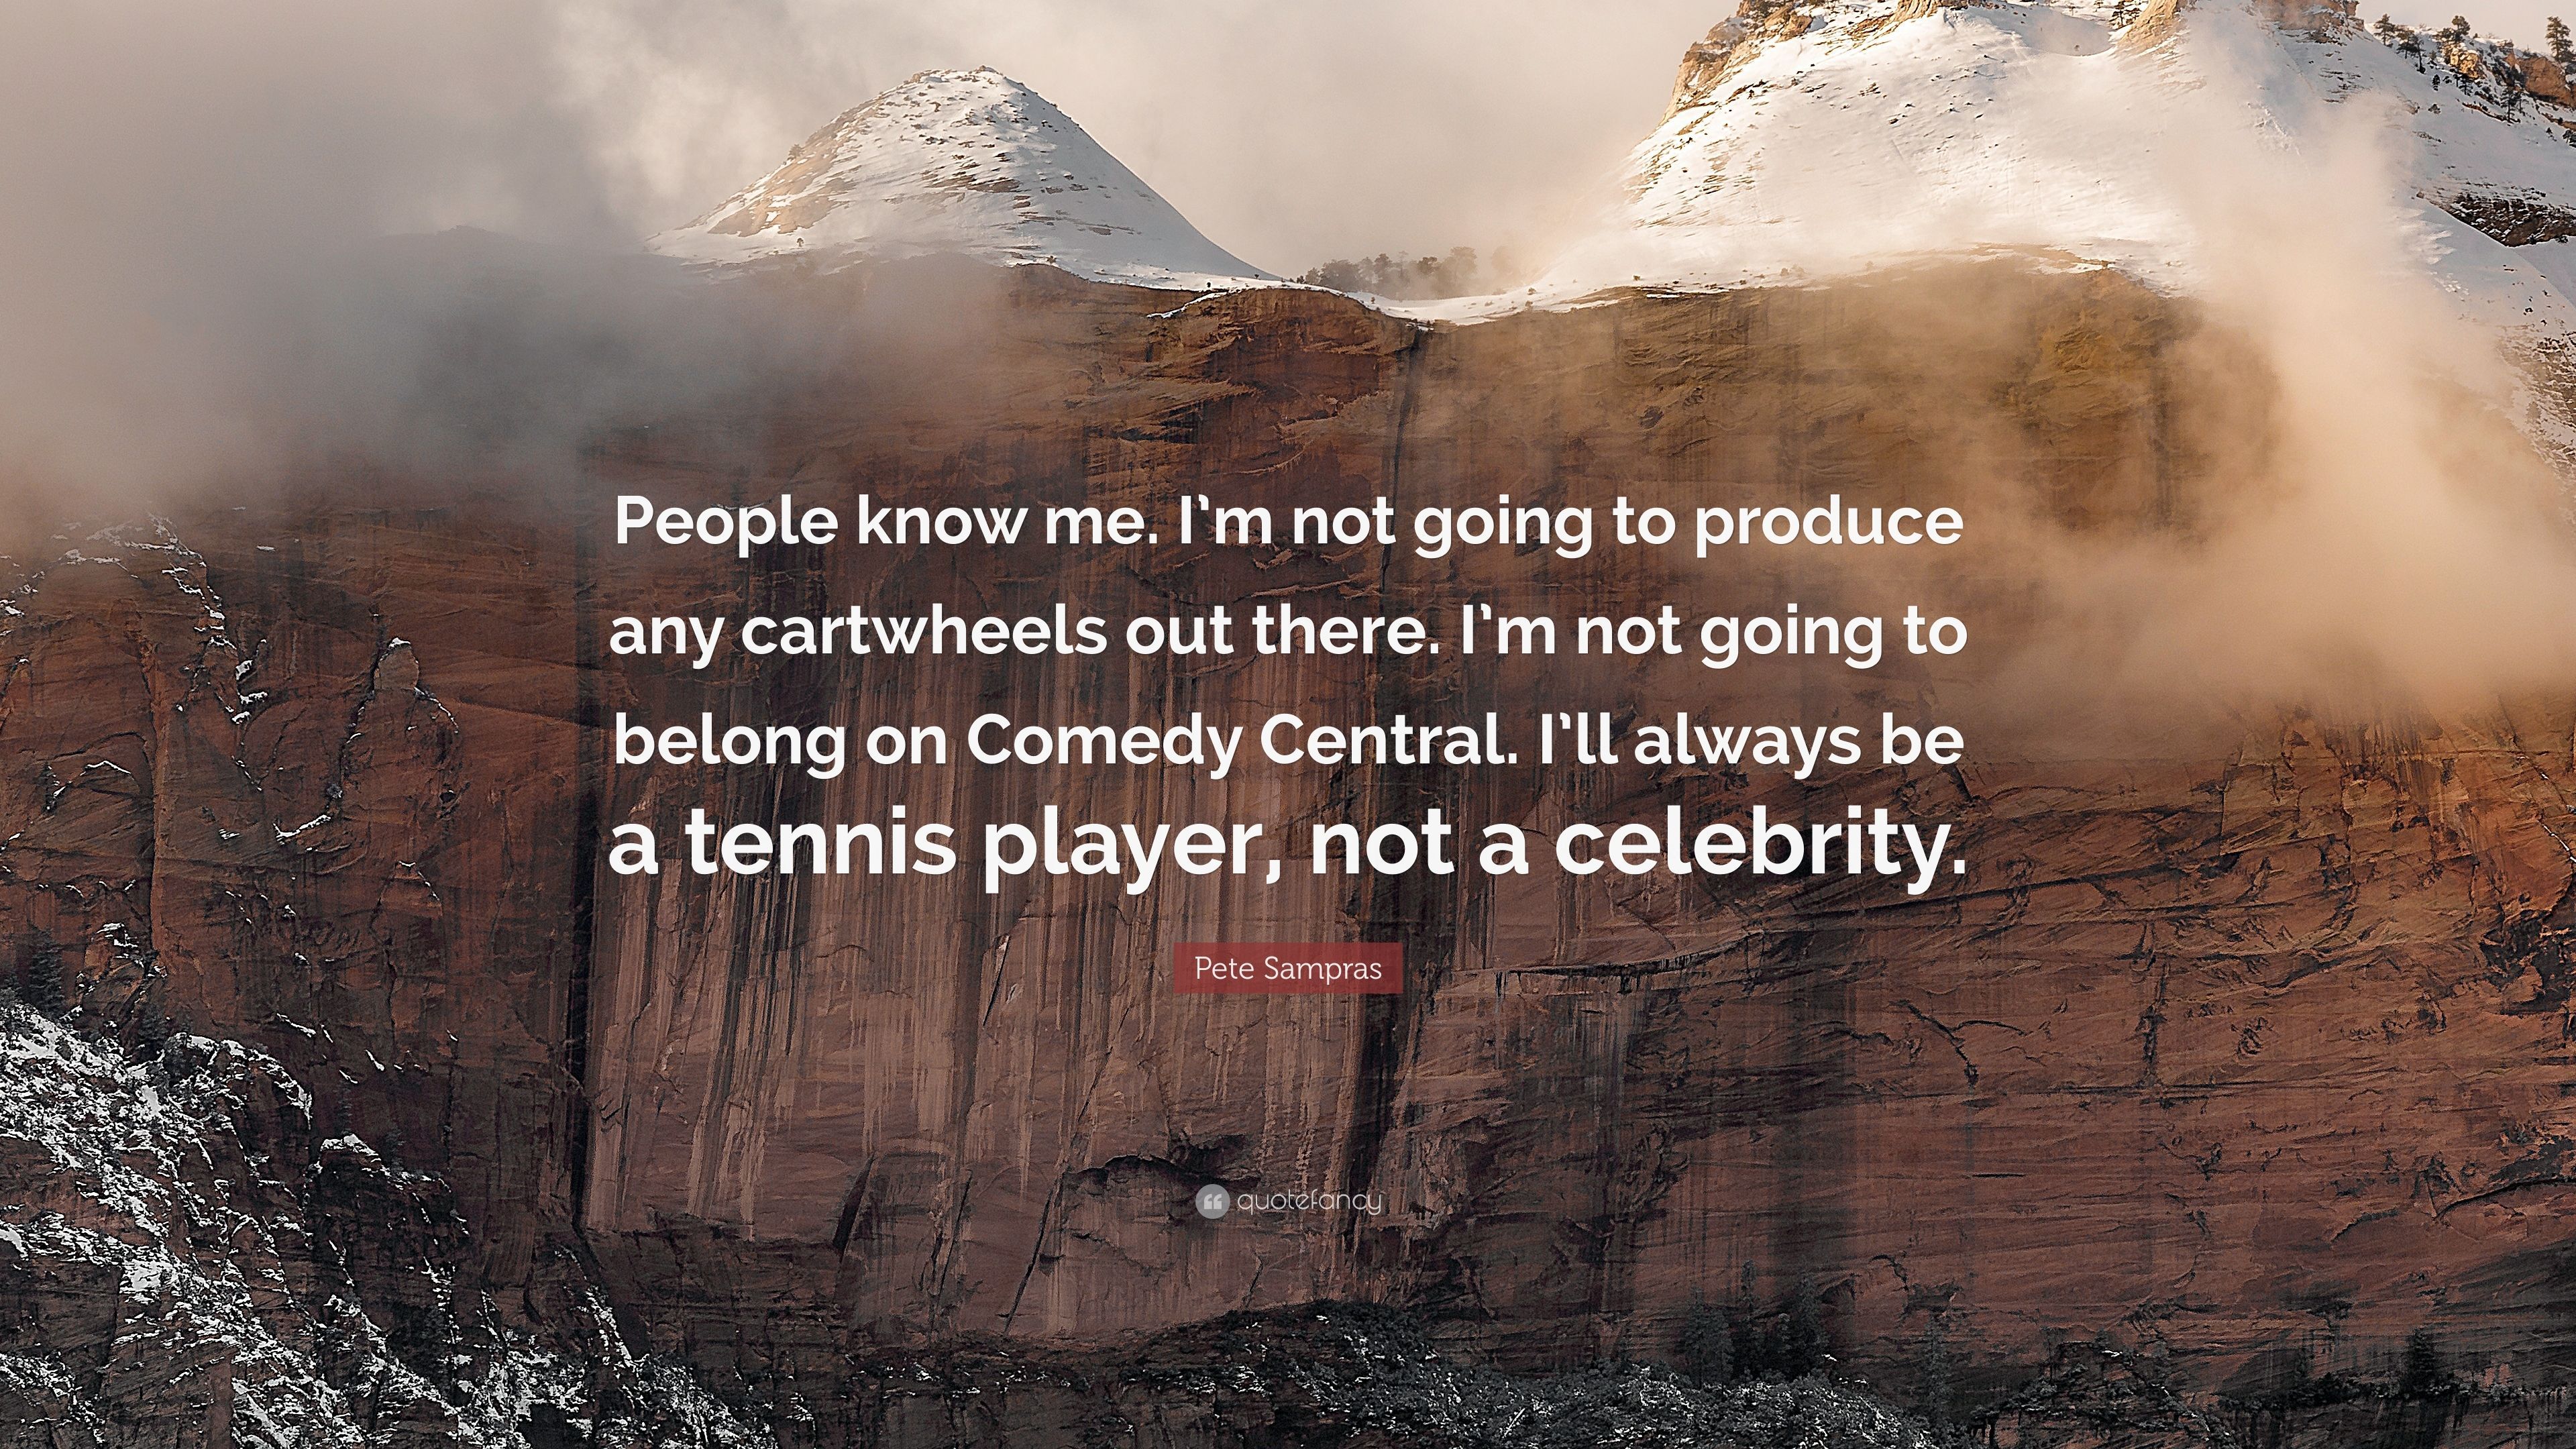 Pete Sampras Quote: “People know me. I'm not going to produce any